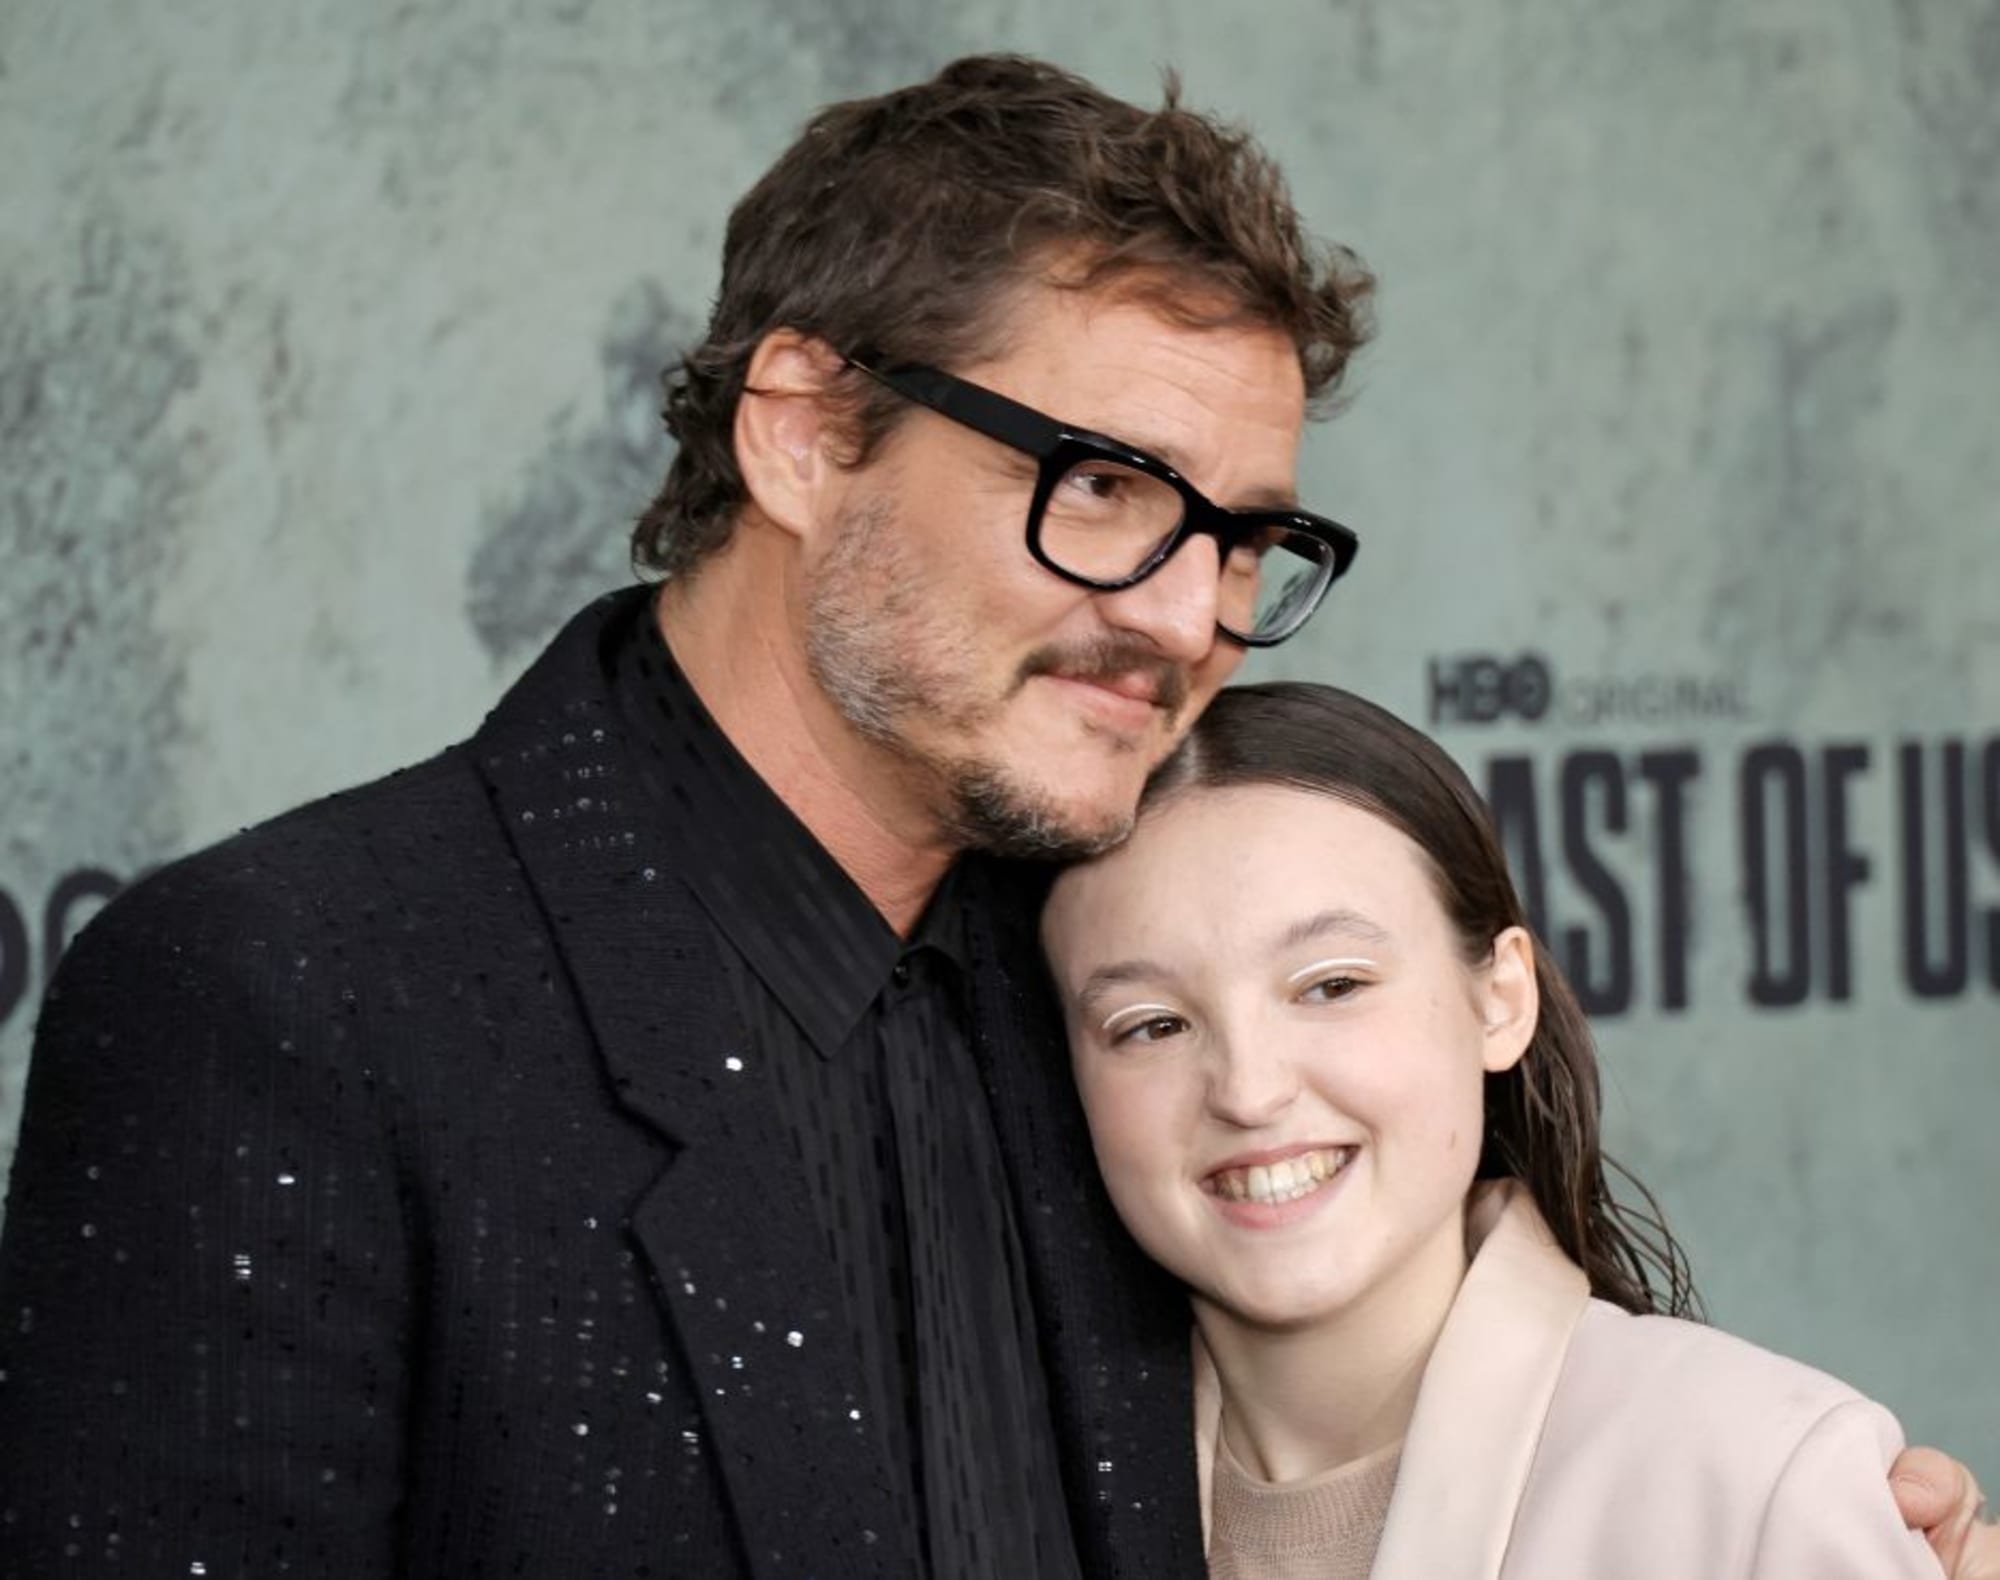 Pedro Pascal and Bella Ramsey step out for The Last of Us premiere